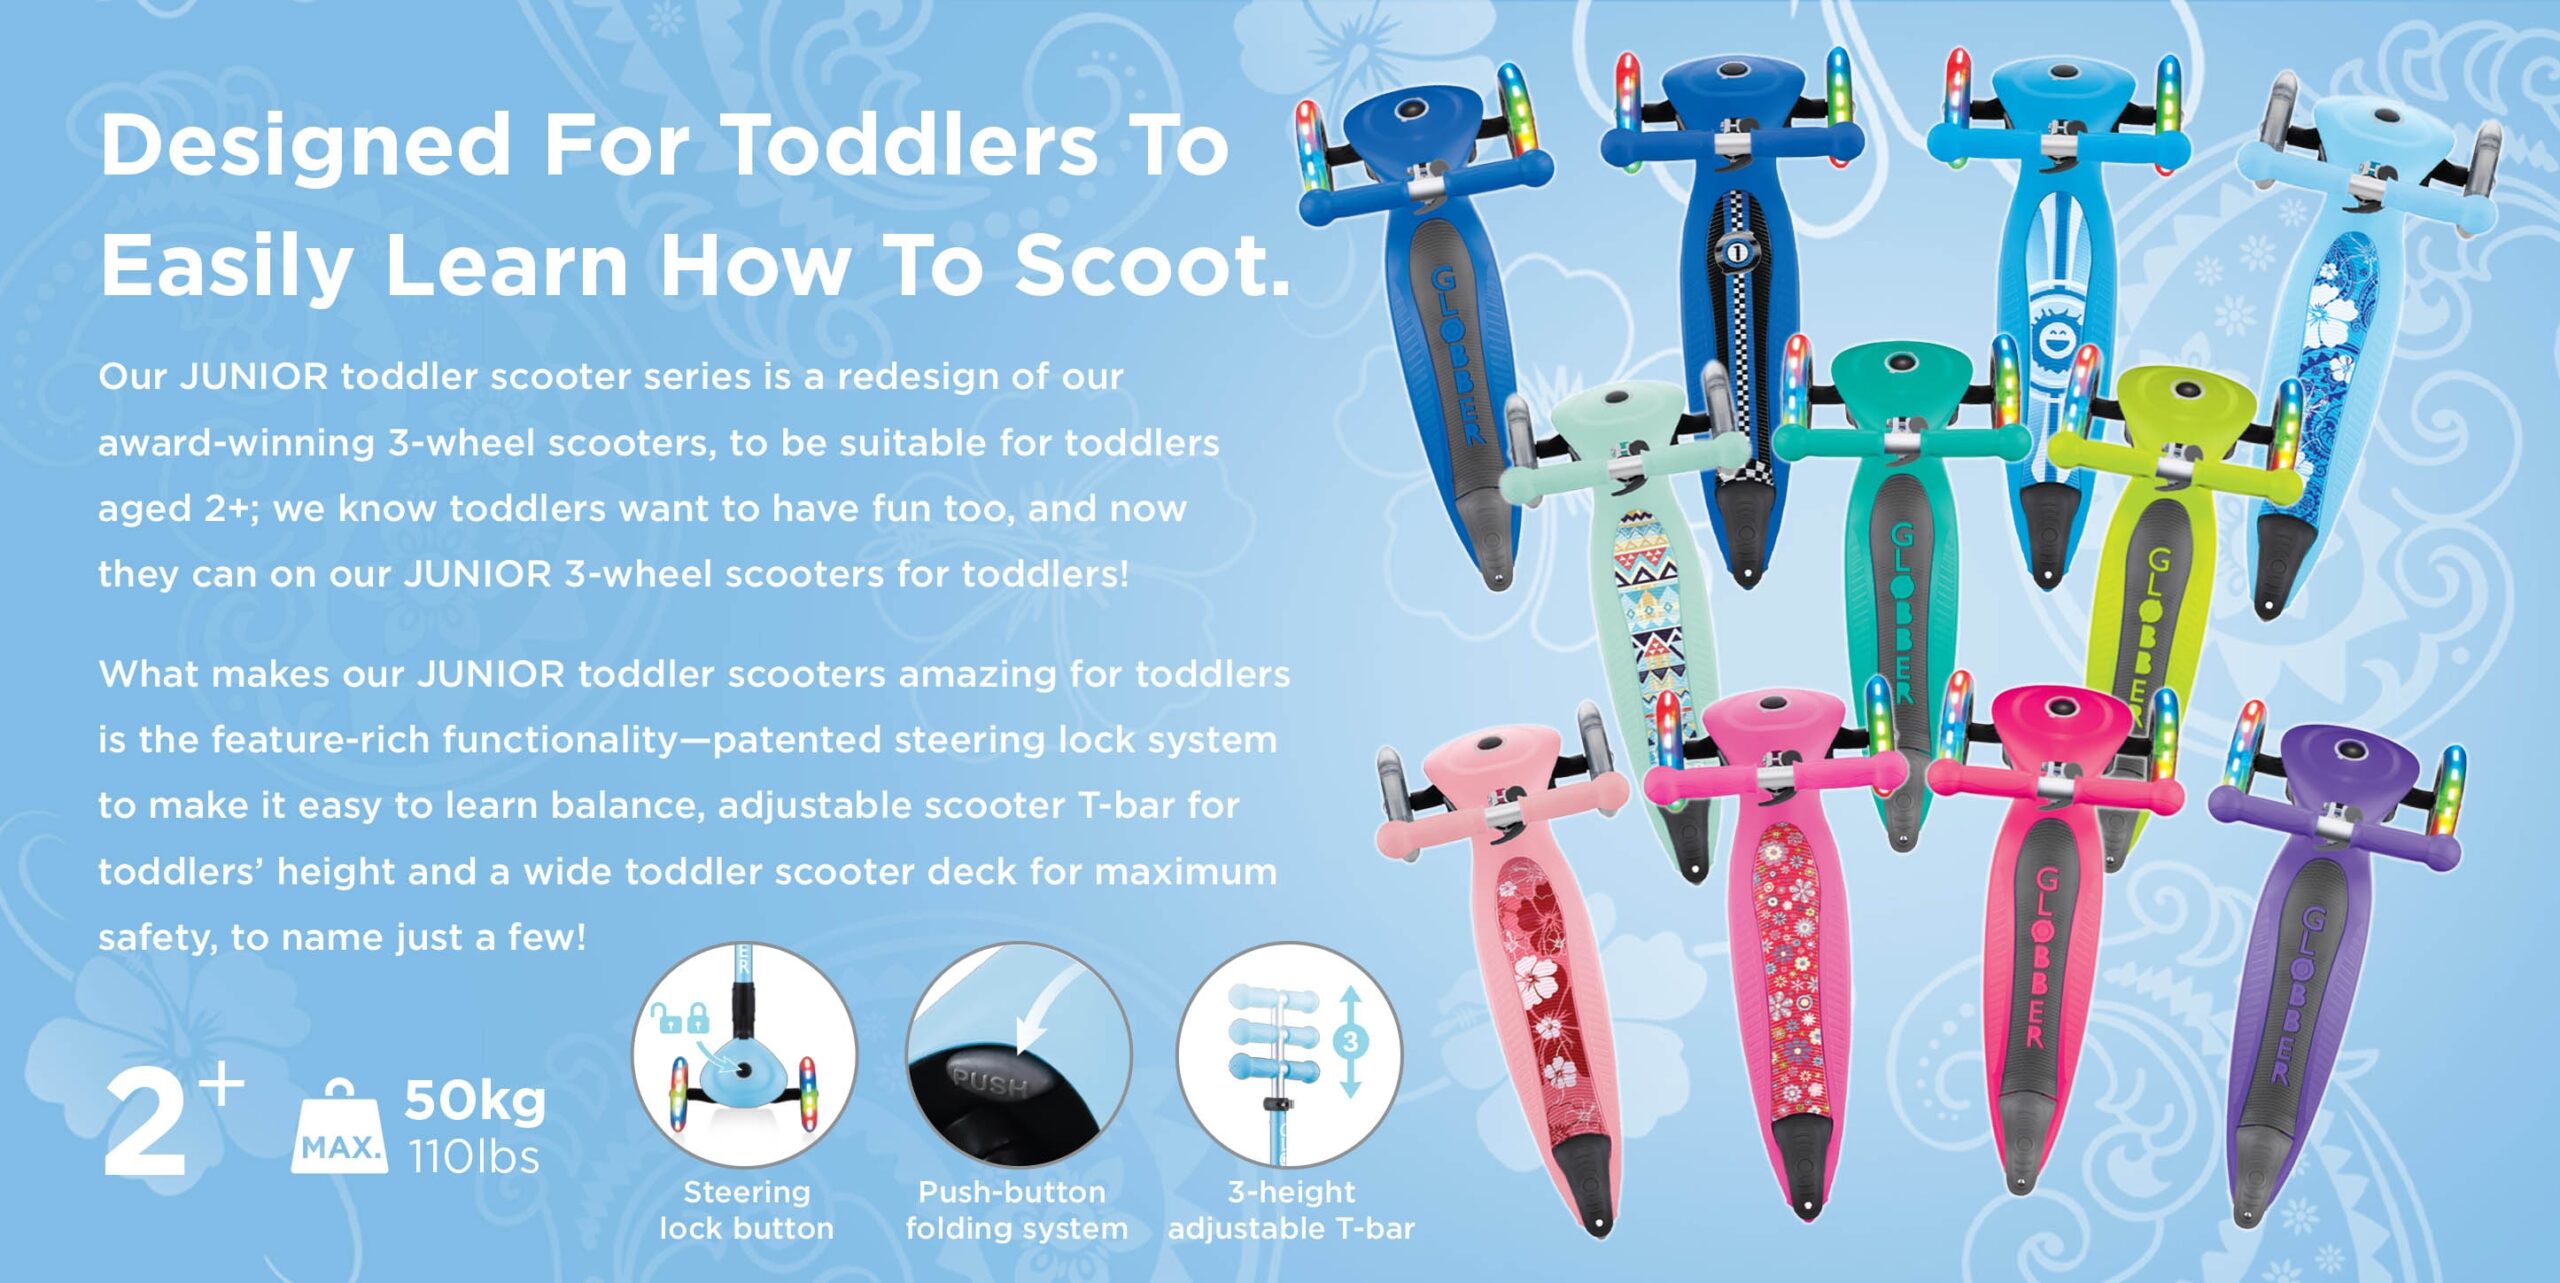 3-wheel-foldable-toddler-scooters-for-2-year-olds-Globber-JUNIOR-1603443908-1